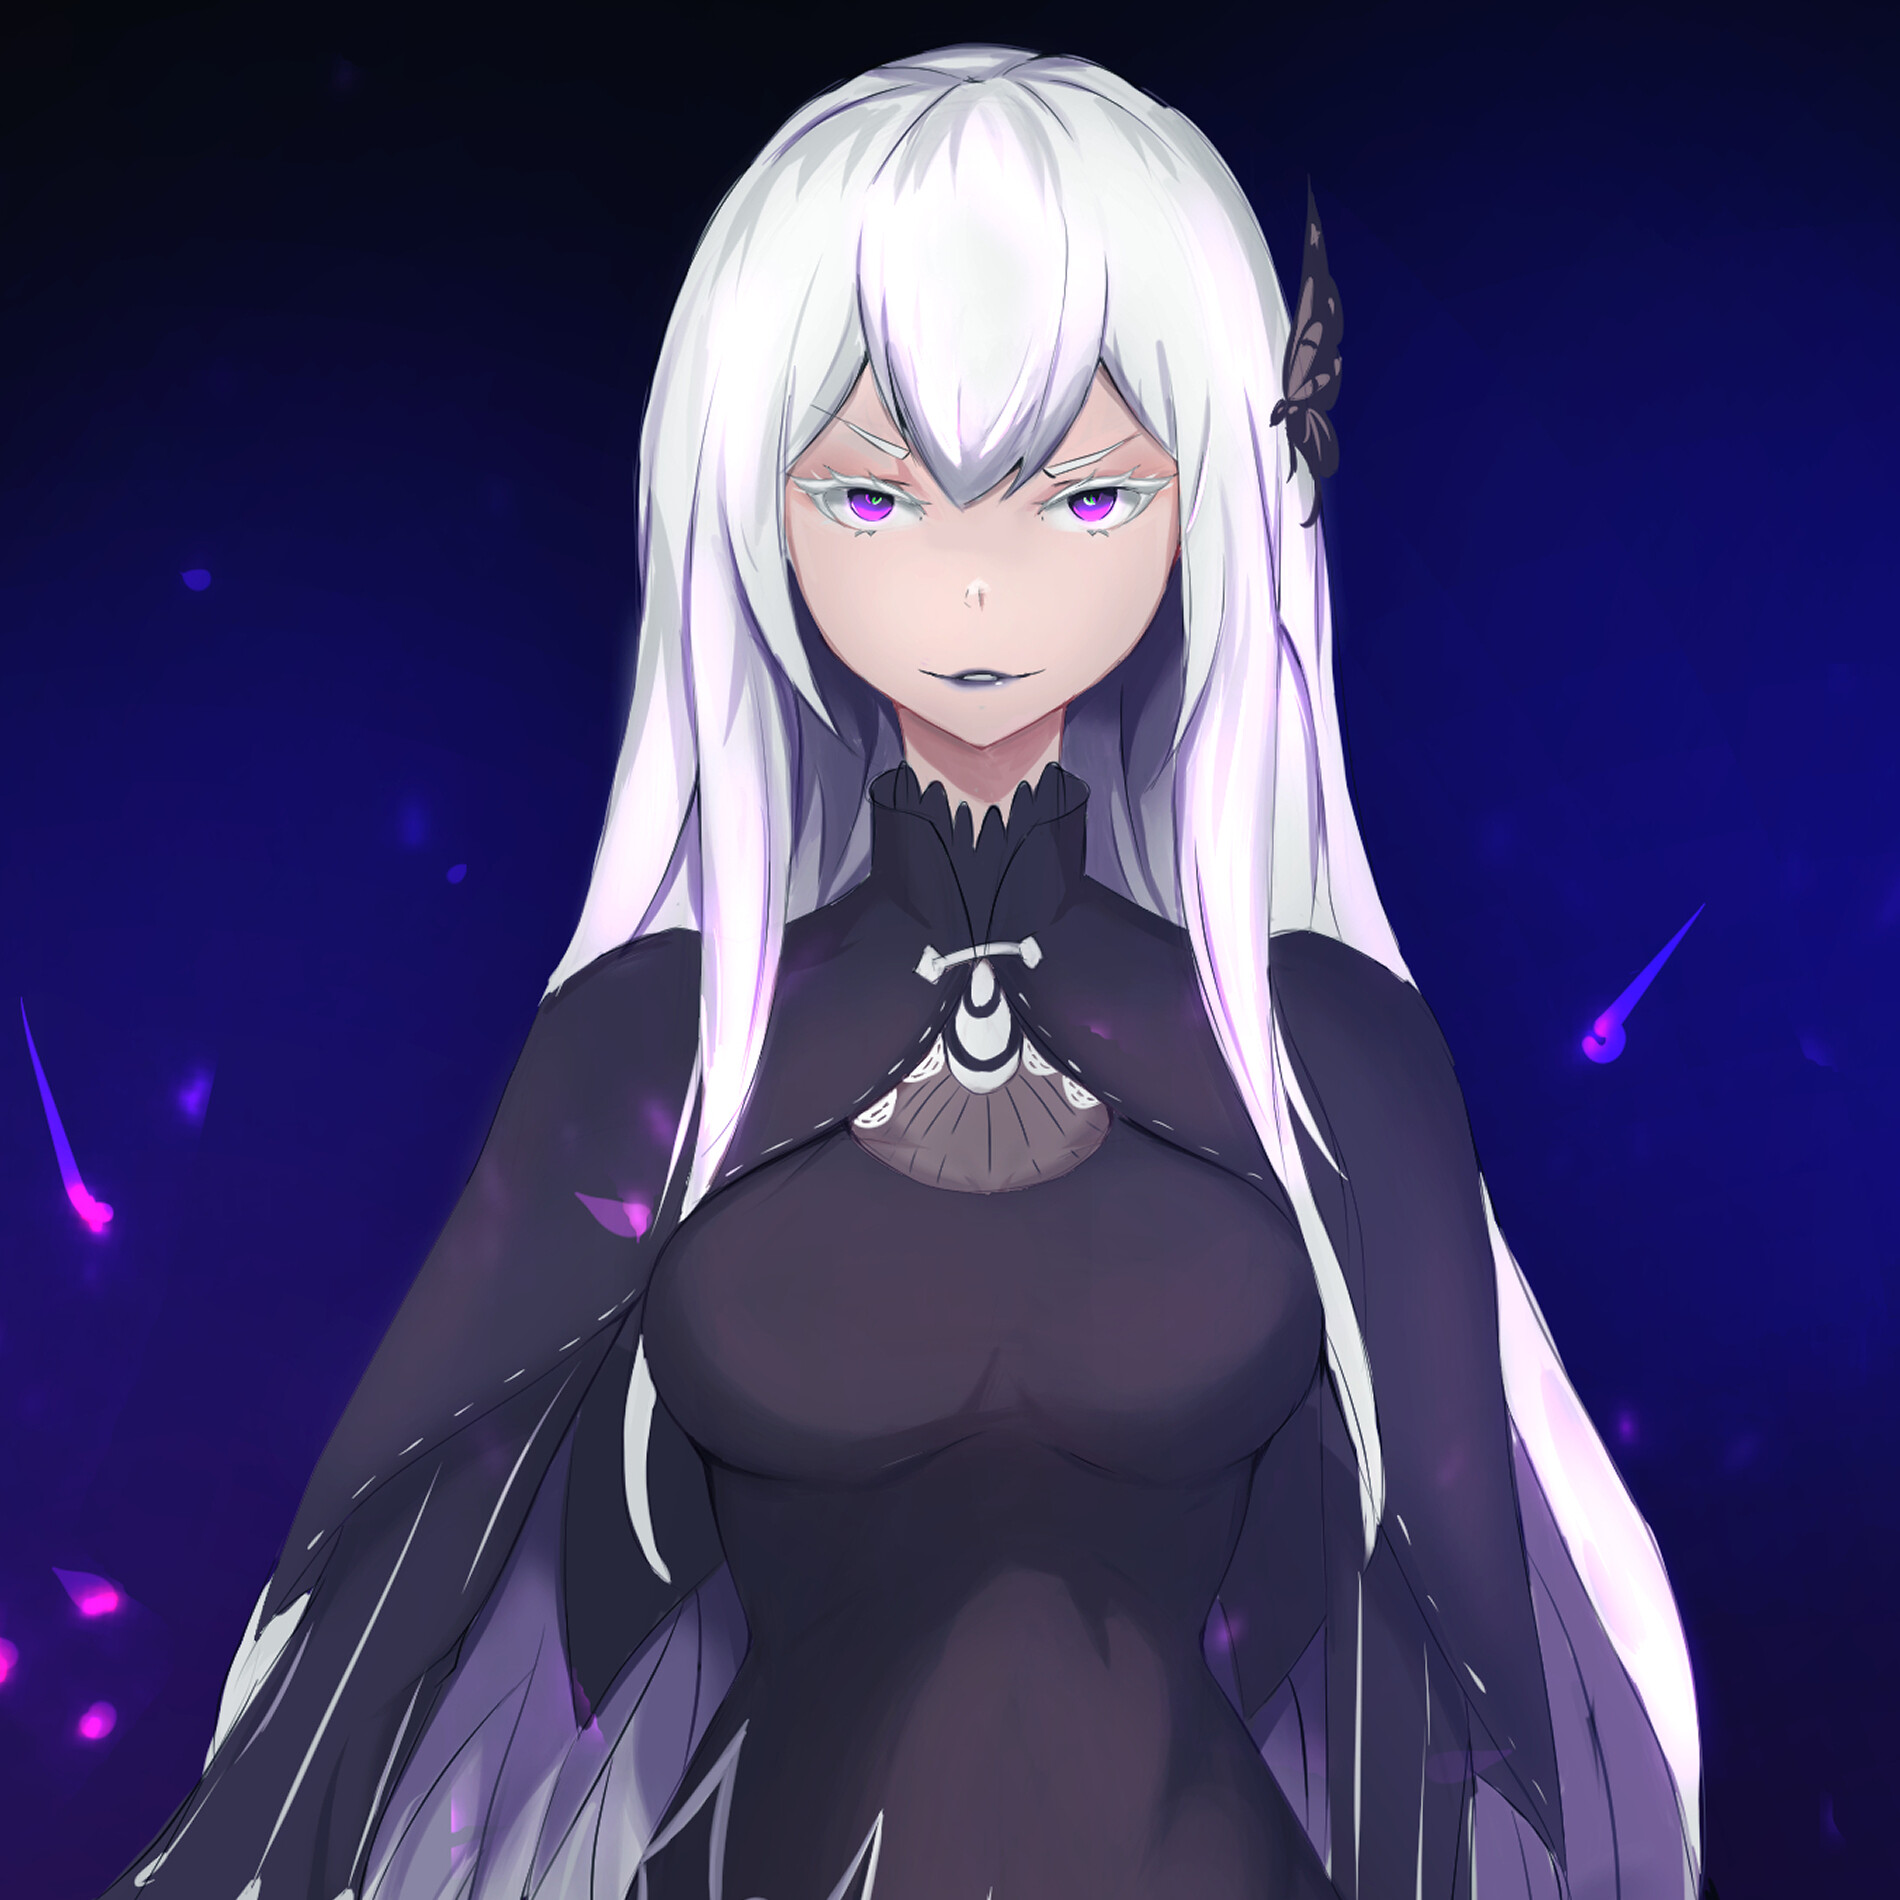 Who Is Echidna In Re Zero